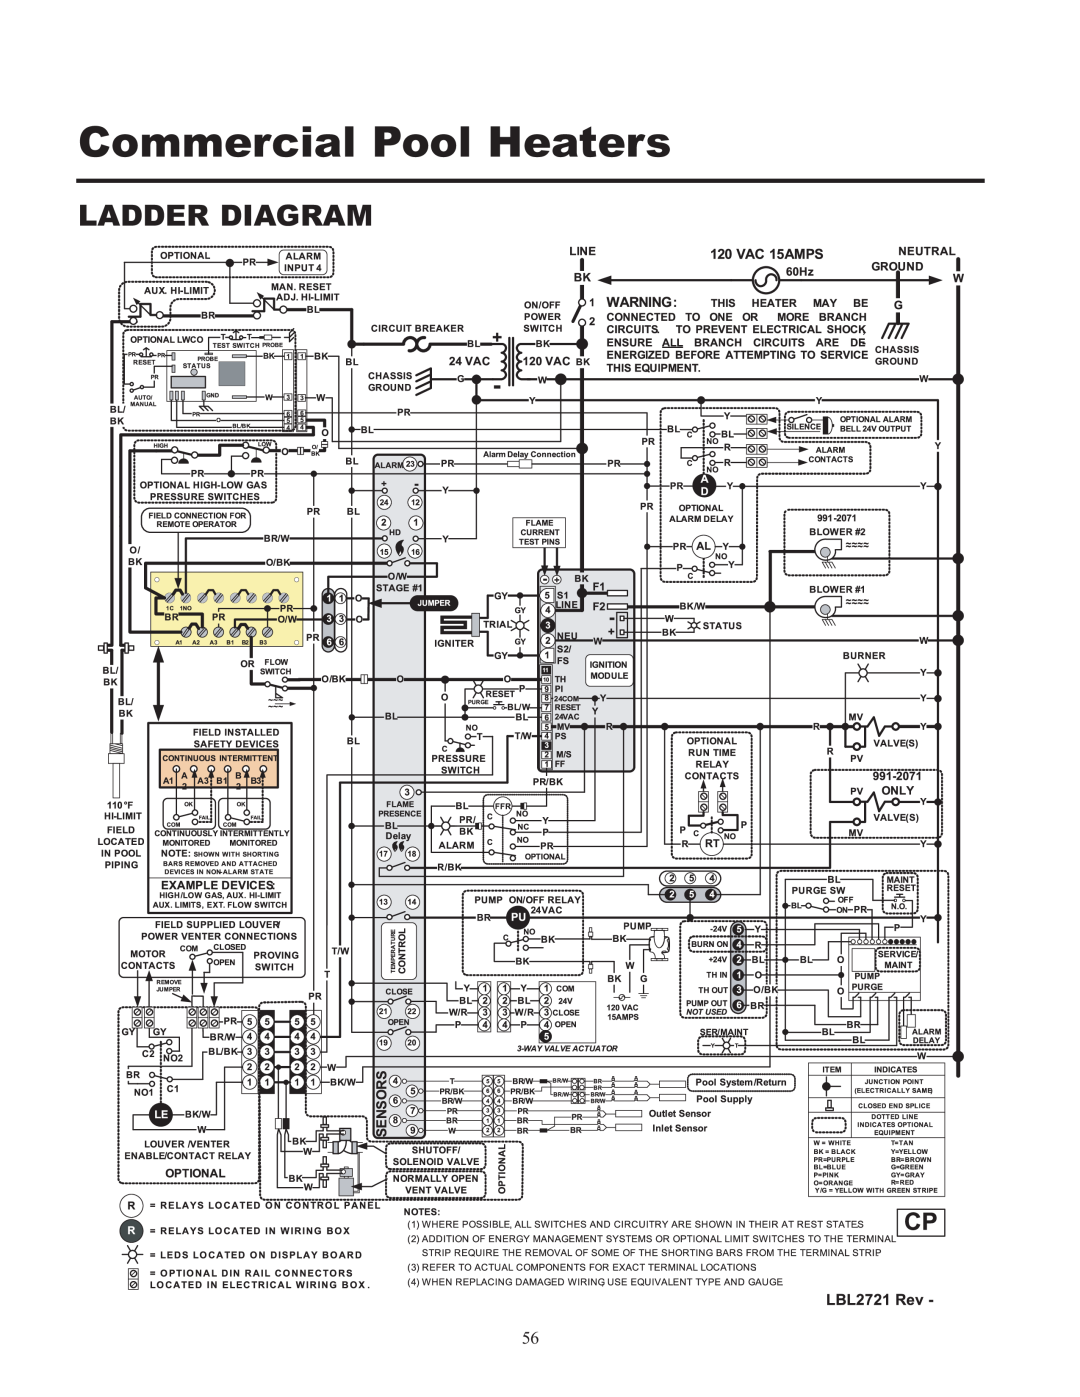 Lochinvar GAS HEATER FOR COMMERICAL POOL APPLICATIONS service manual Ladder Diagram, Commercial Pool Heaters 